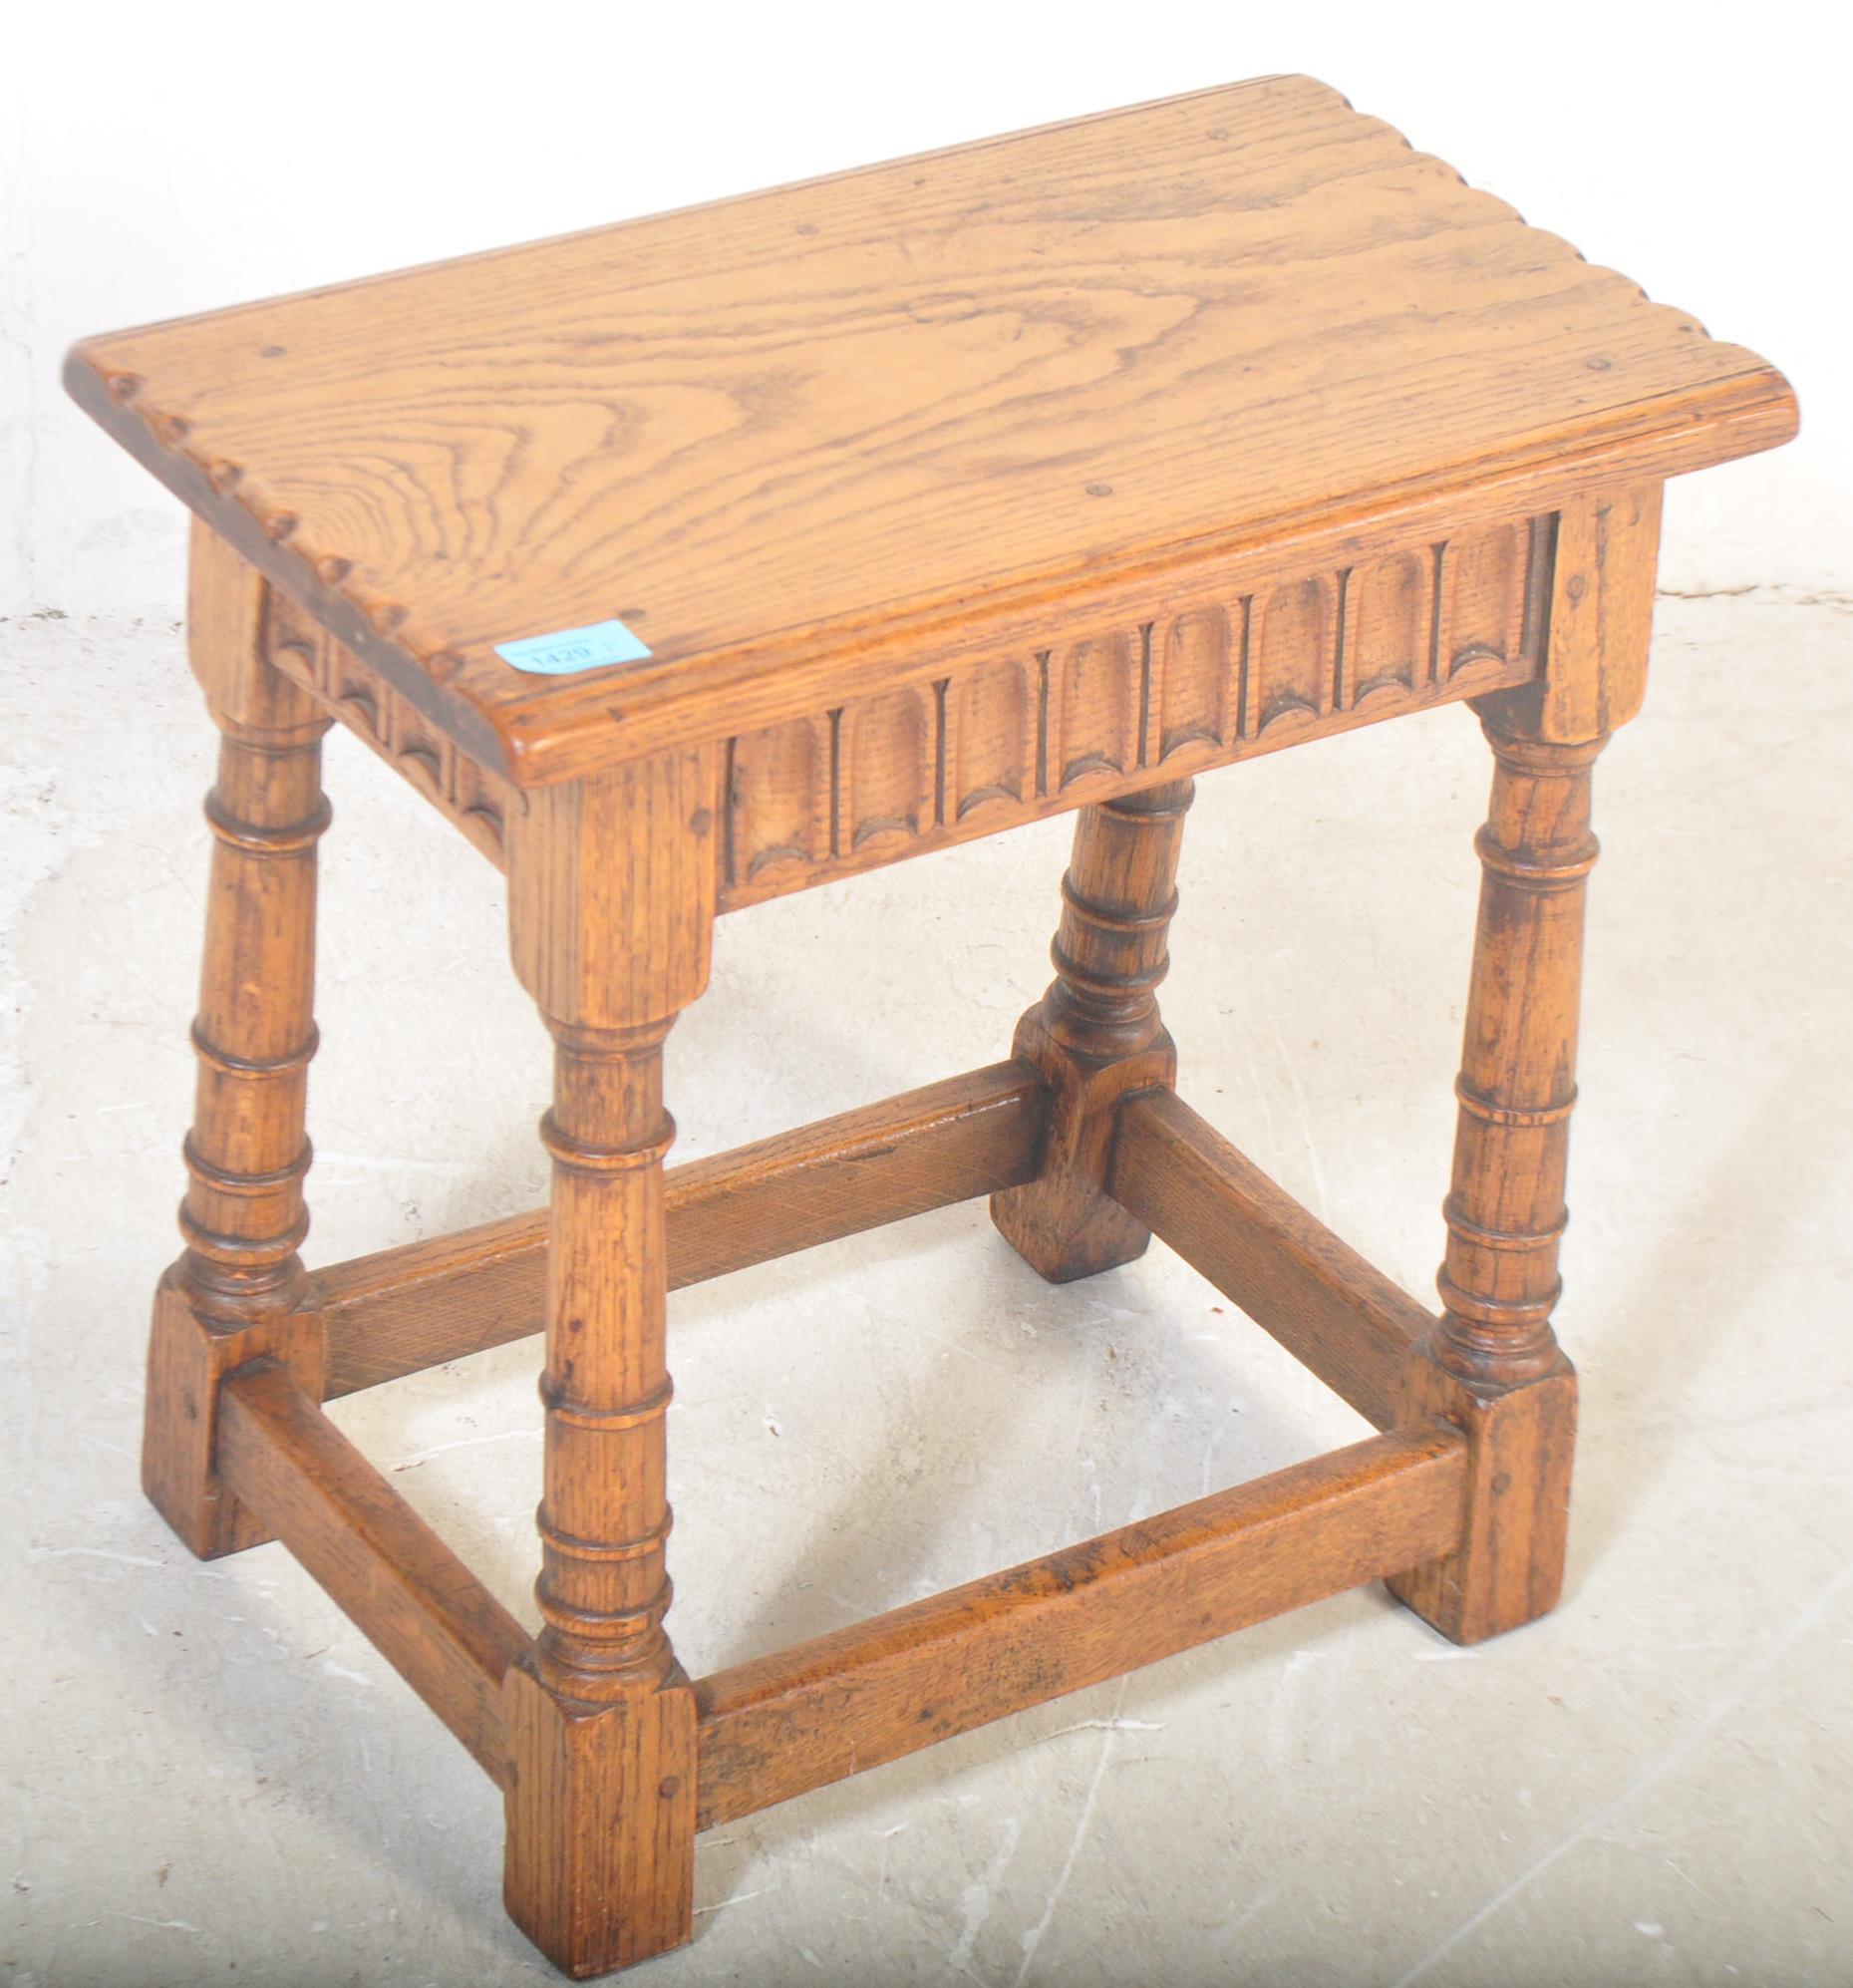 19TH CENTURY PEG JOINTED ARTS & CRAFTS OAK JOINT STOOL - Image 2 of 4